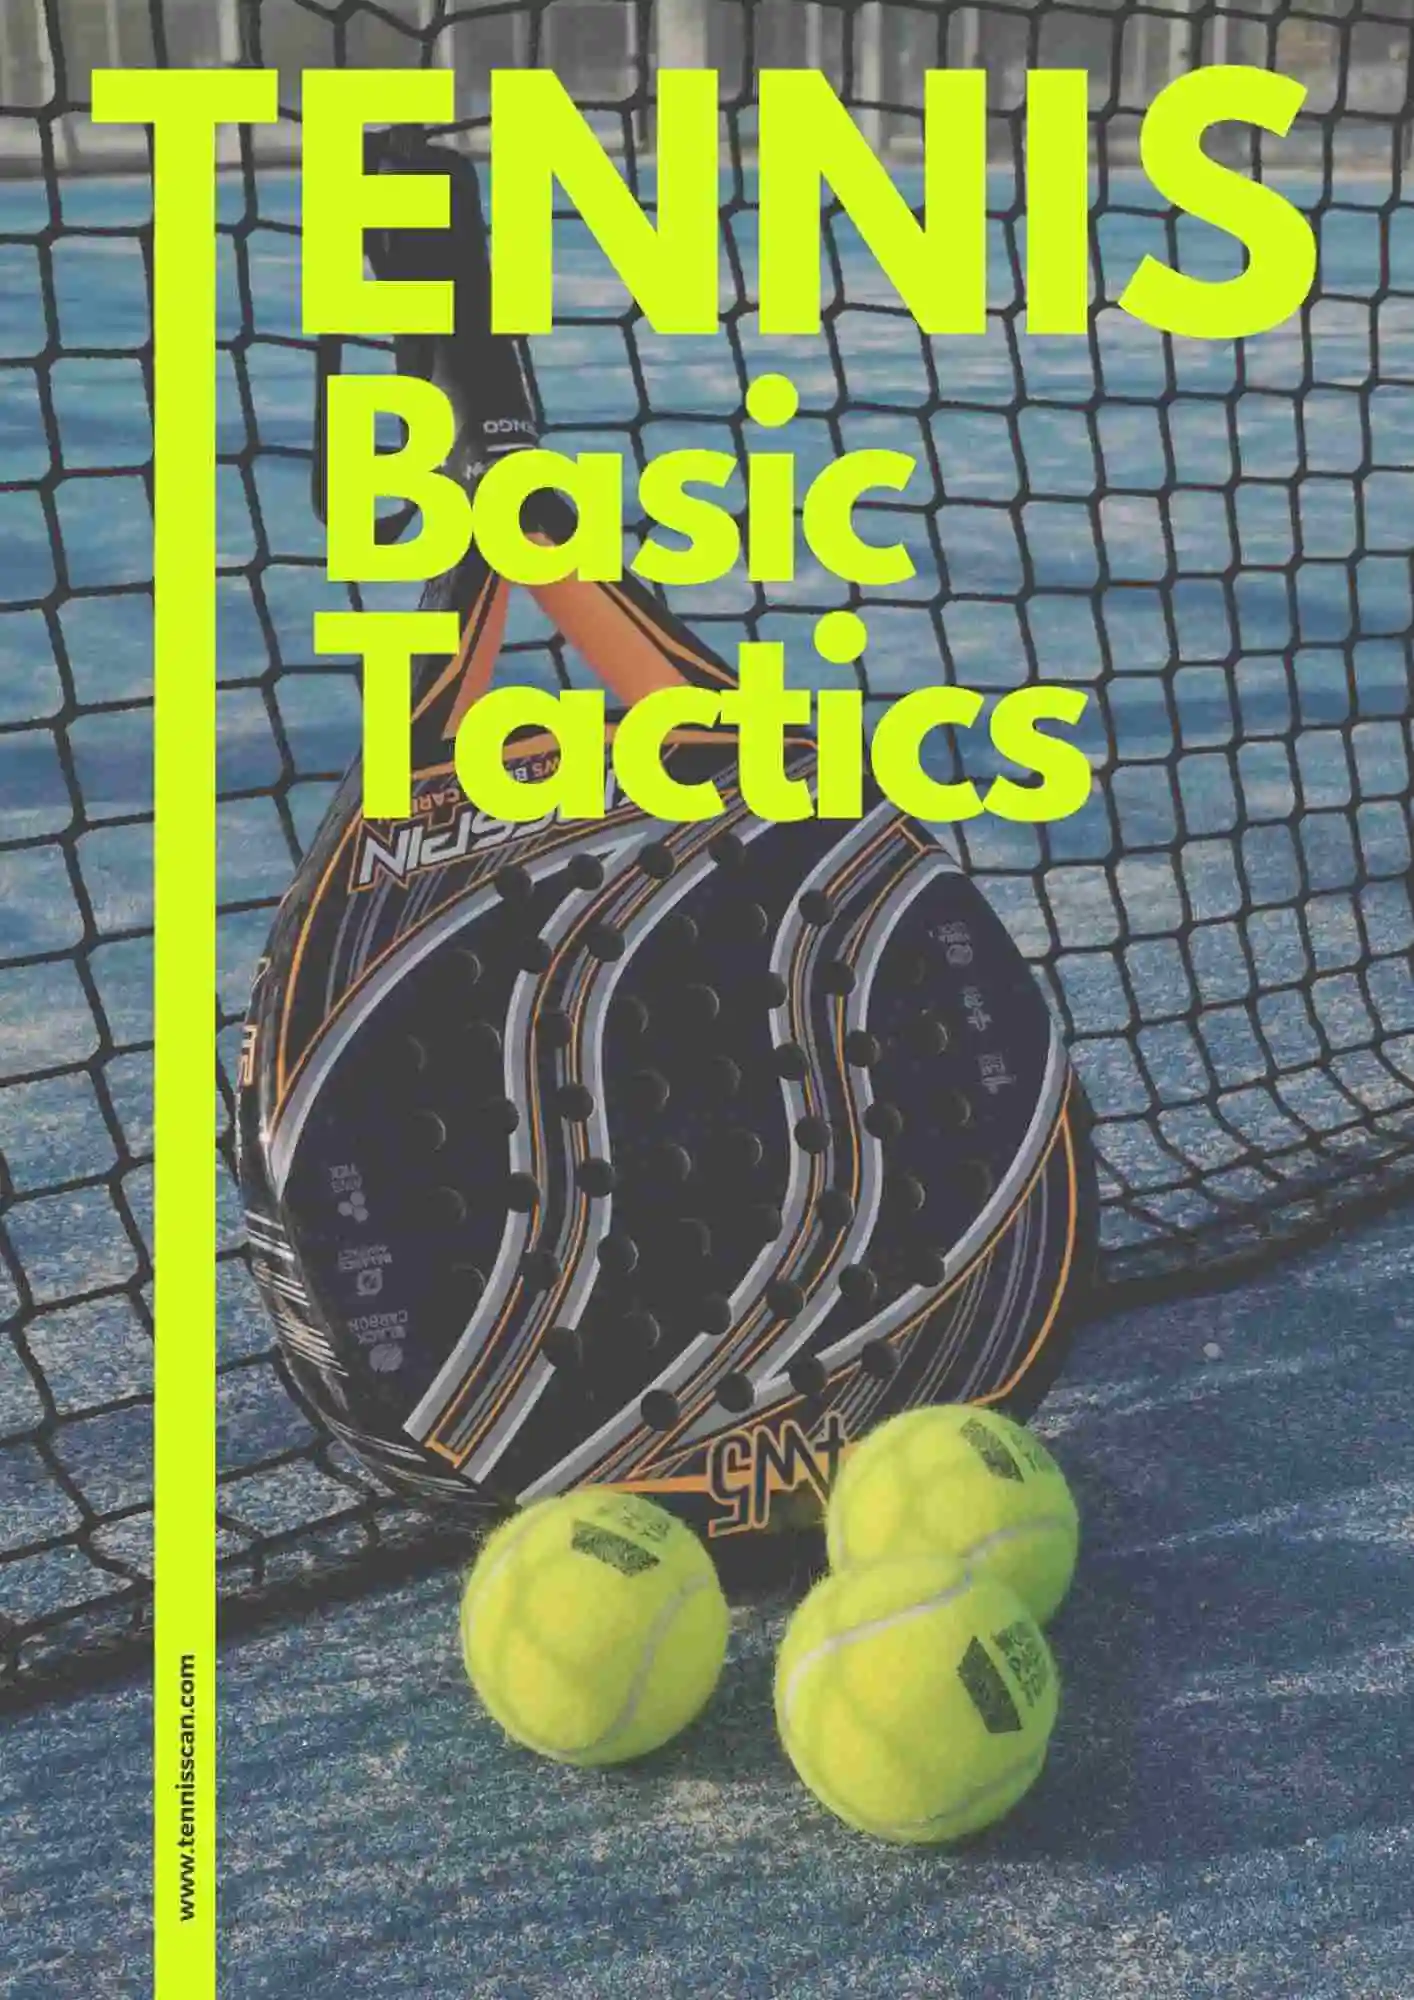 How to Play Doubles Tennis for Beginners